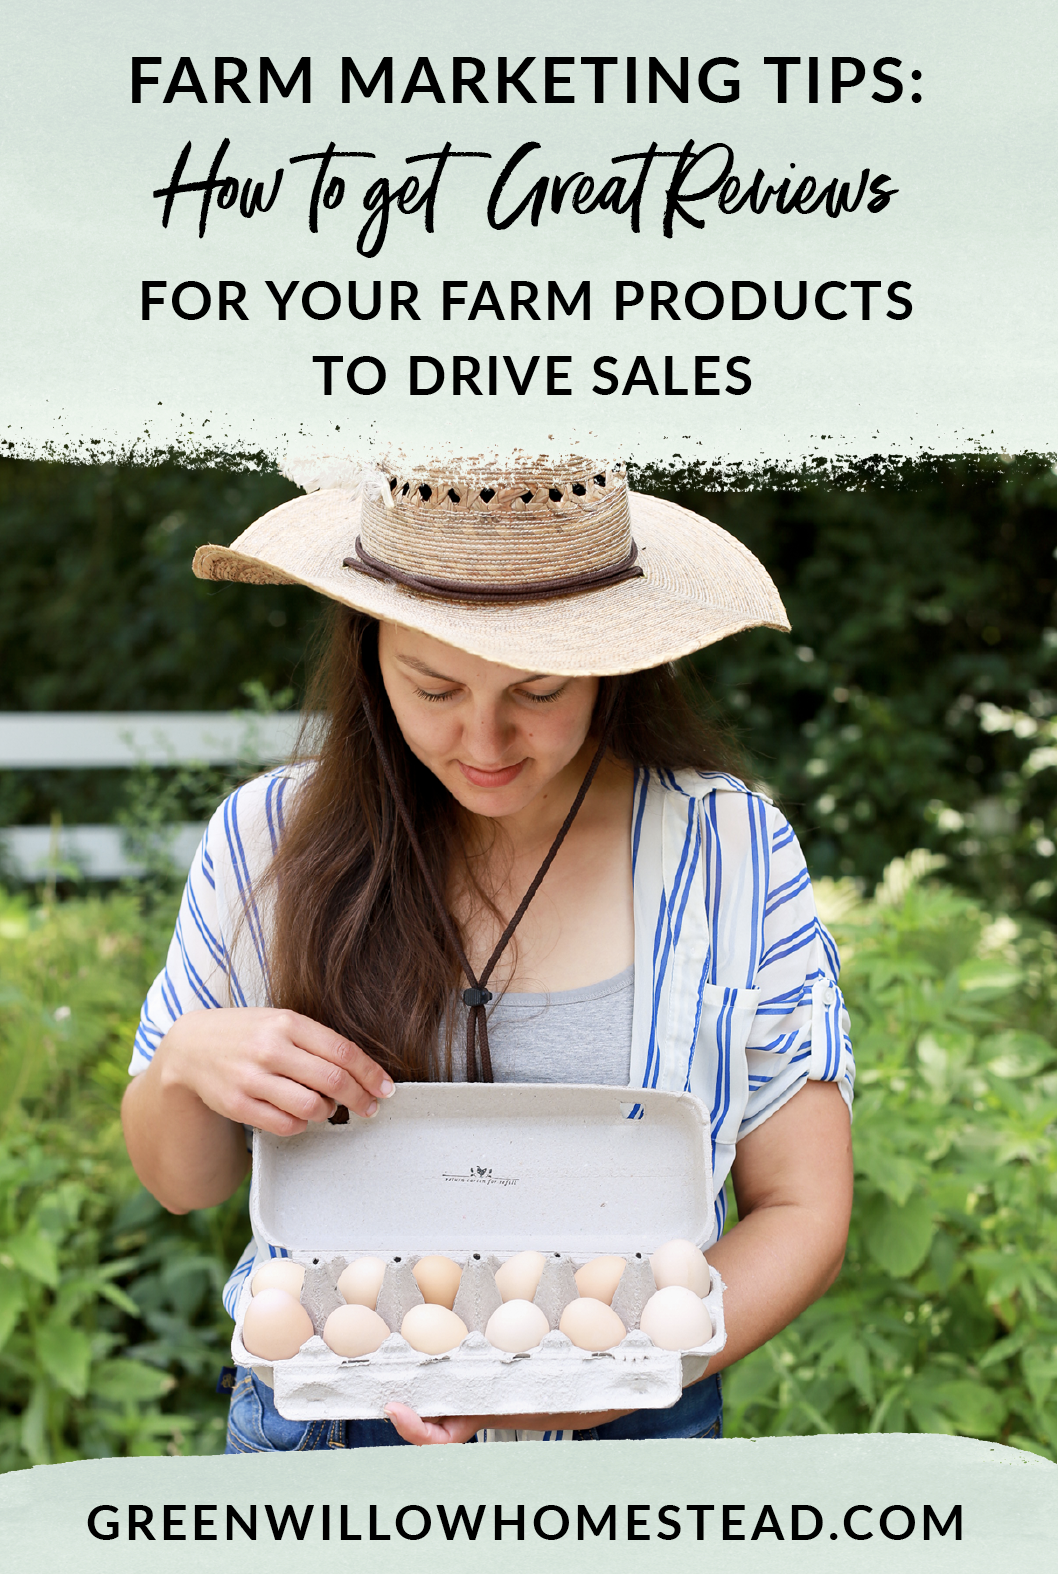 Farm Marketing Tips How to get great reviews for farm products that drives sales